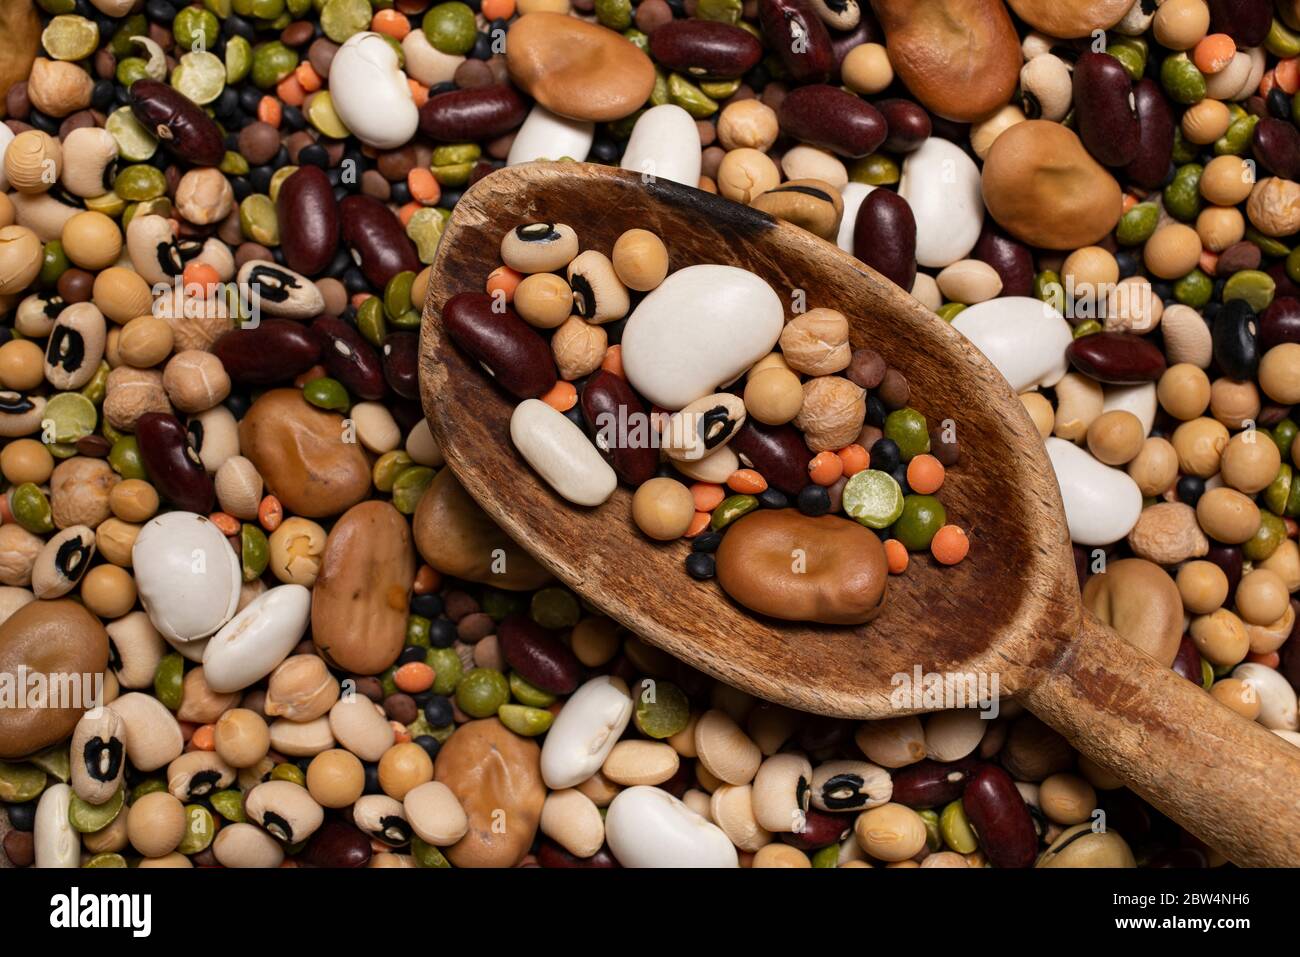 Background with variety of raw and colorful dry legumes rich in protein suitable for a healthy diet Stock Photo